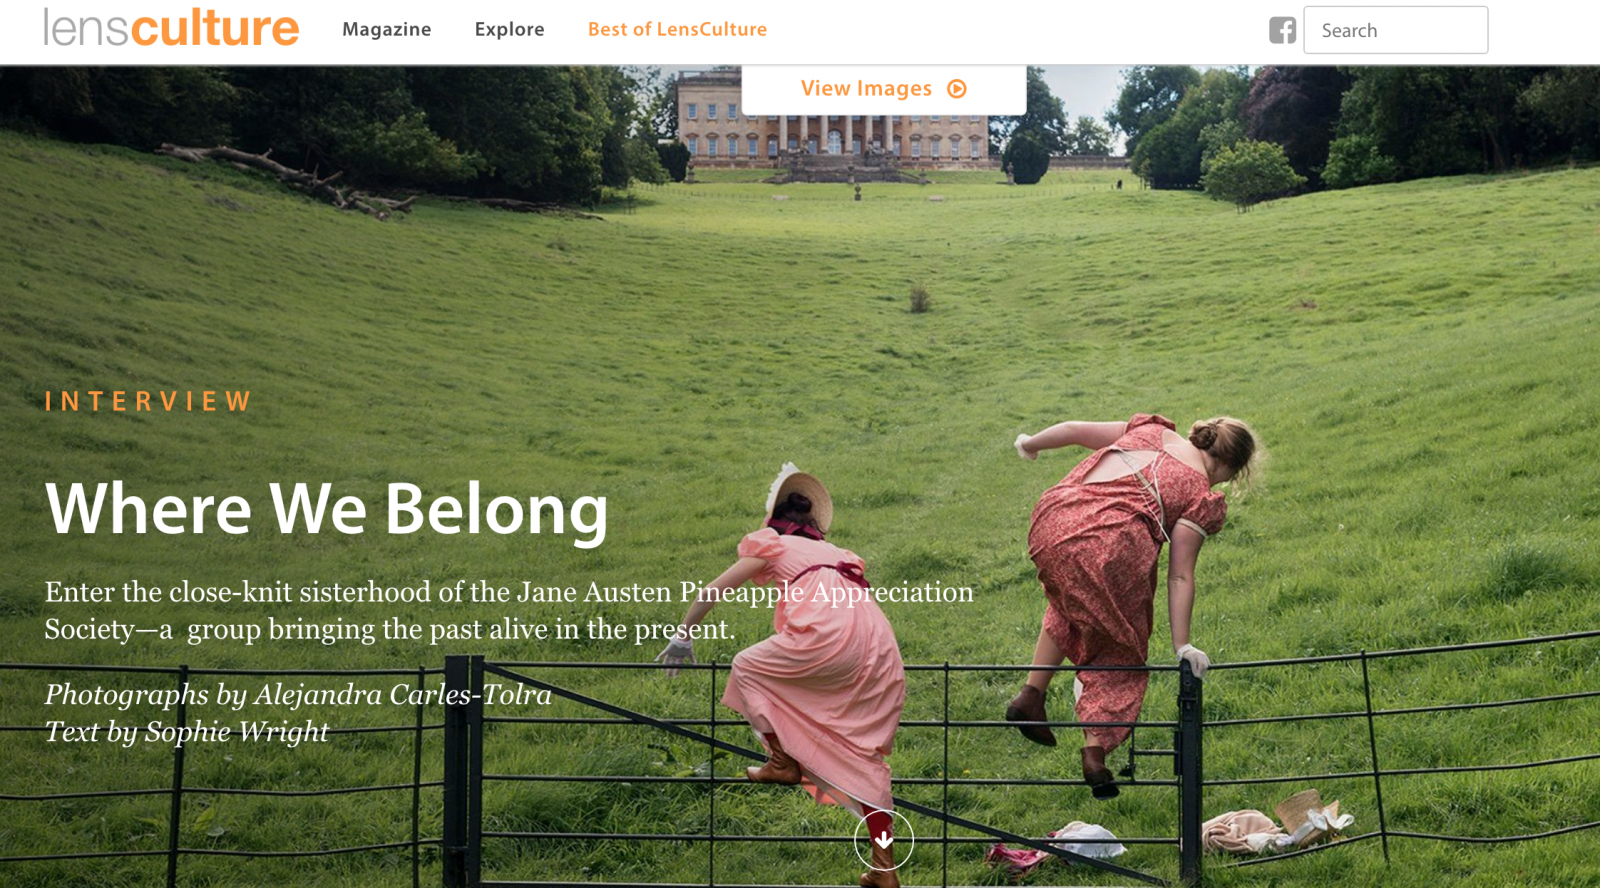 Thumbnail of 'Where We Belong' at Lensculture. Interview by Sophie Wright